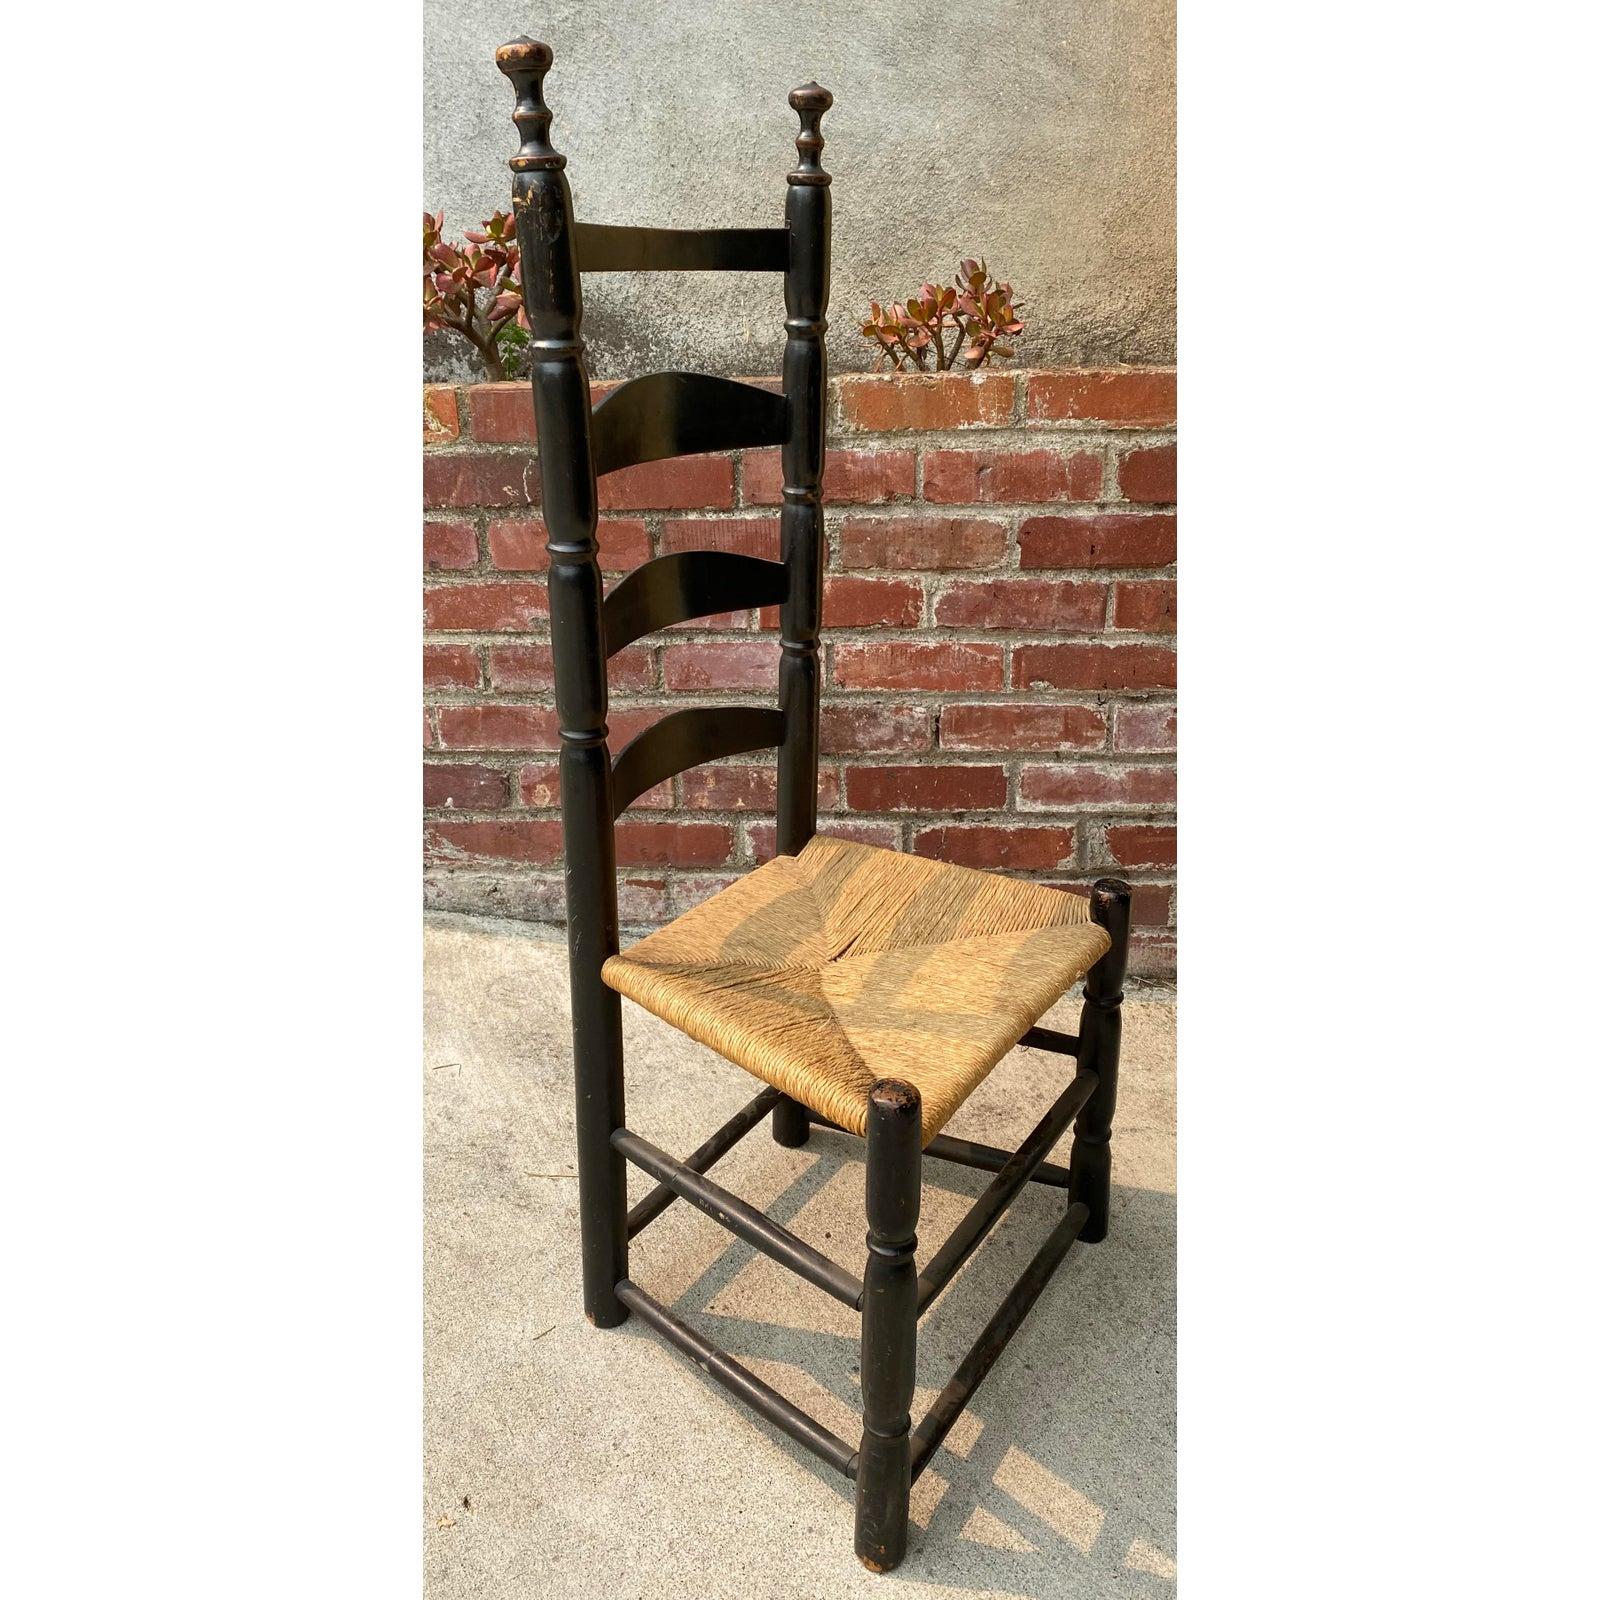 18th-19th century American ladder back chair

Classic ladder back chair with rush seat

Measures: 18